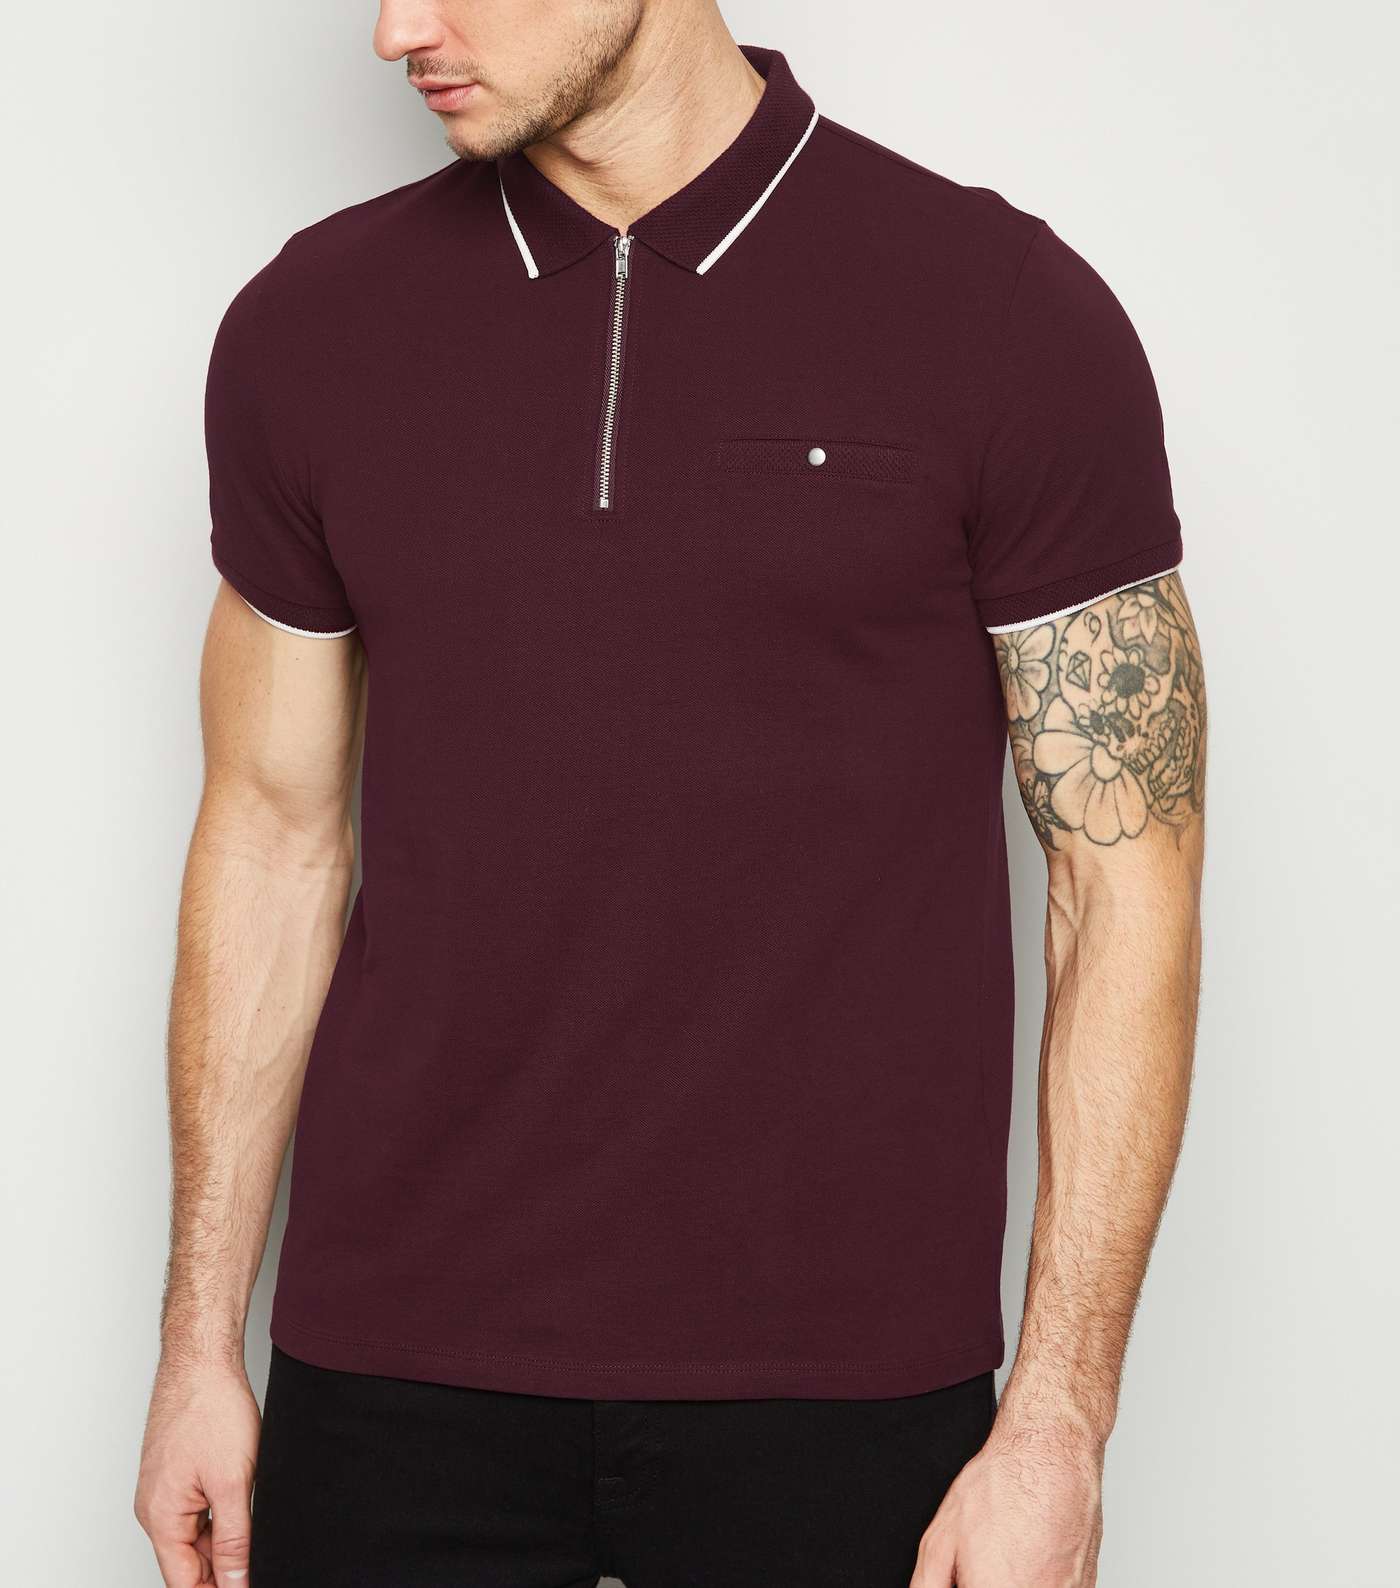 Burgundy Tipped Zip Front Polo Shirt